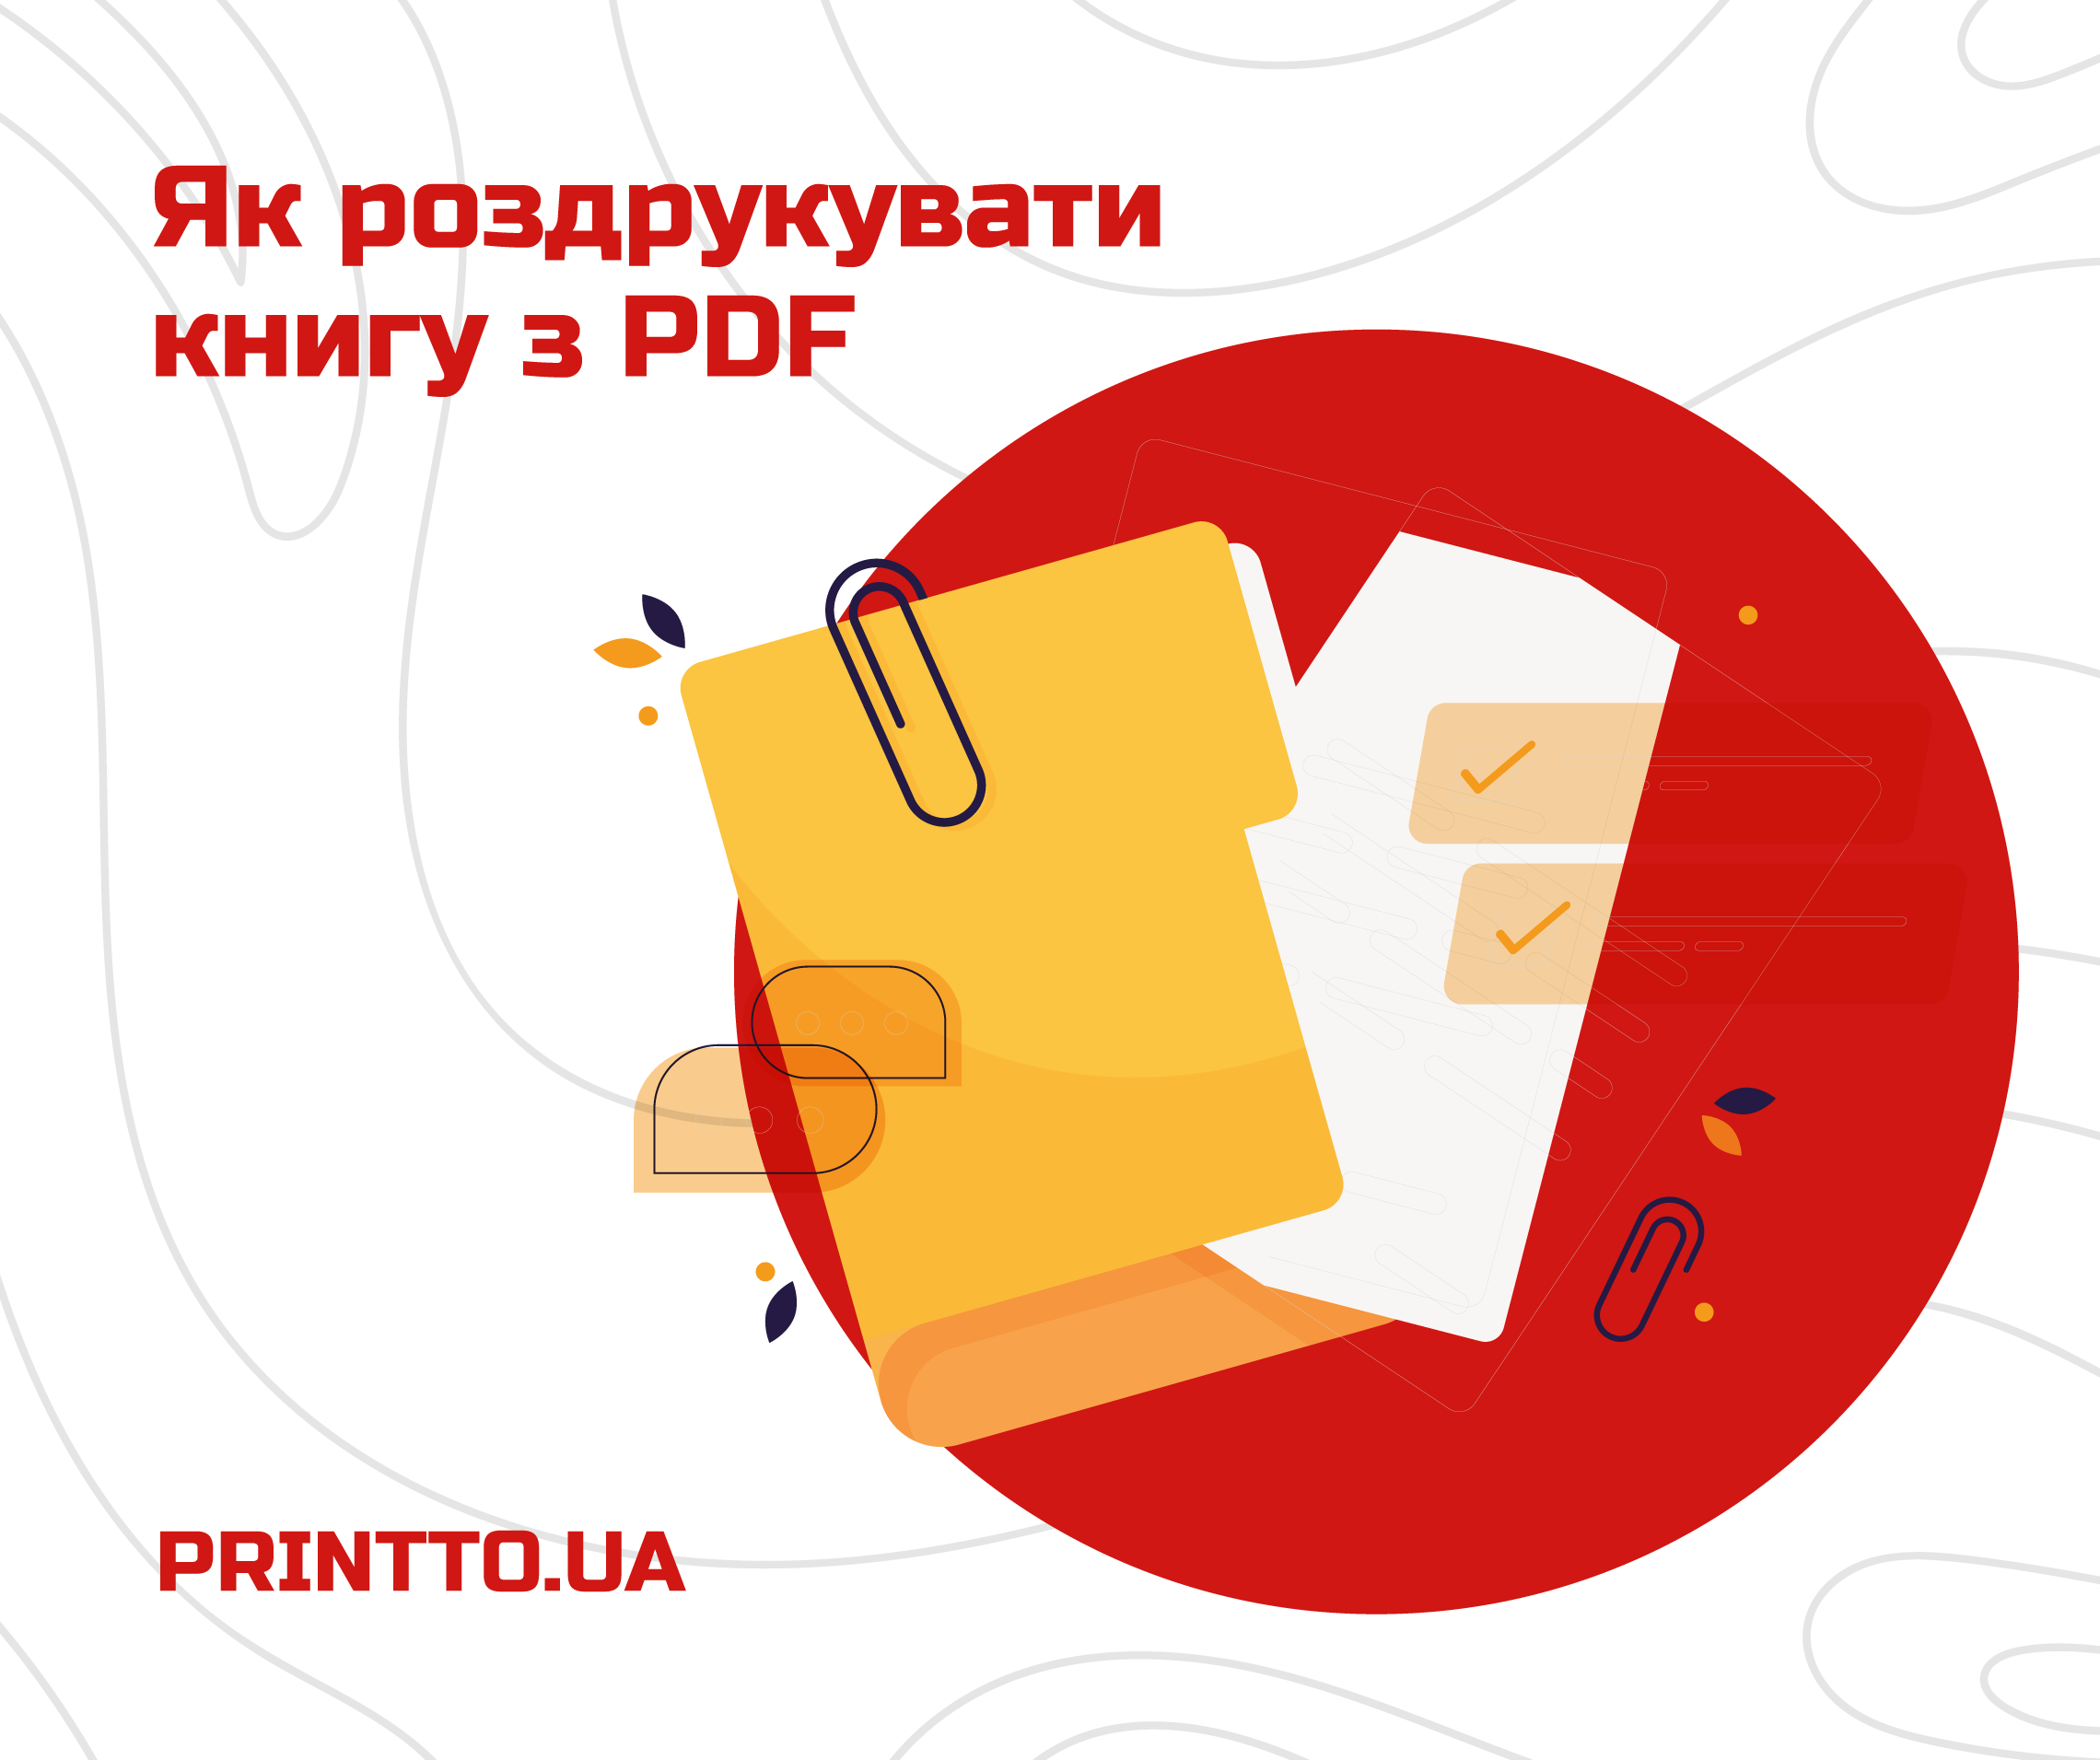 How to print a book from PDF